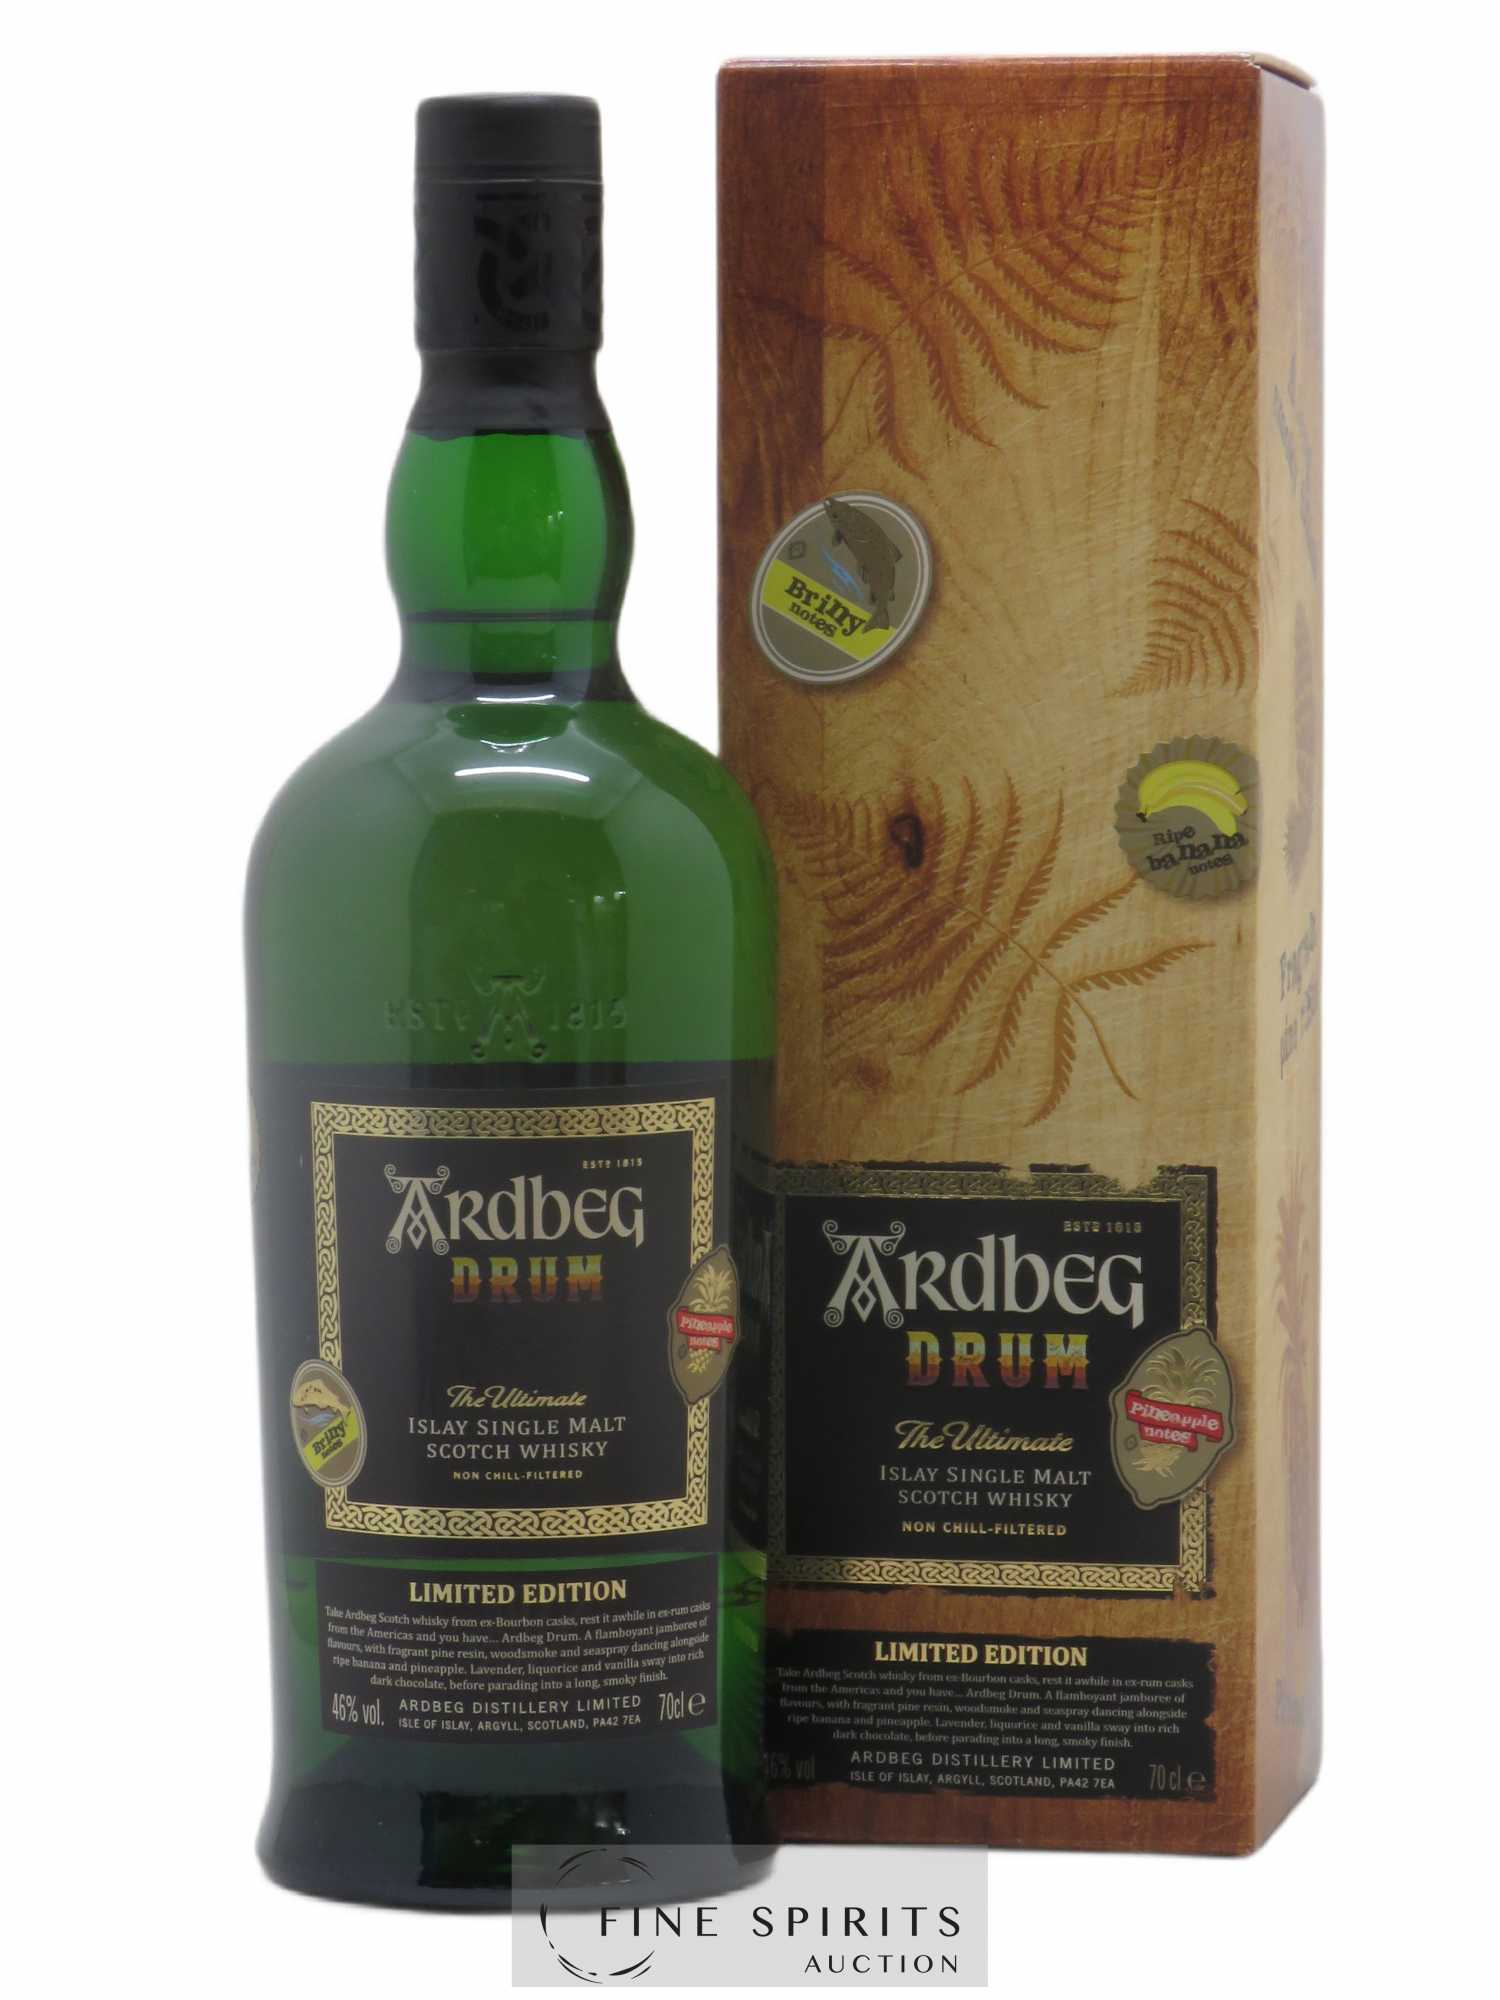 Ardbeg Of. Drum Limited Edition The Ultimate 